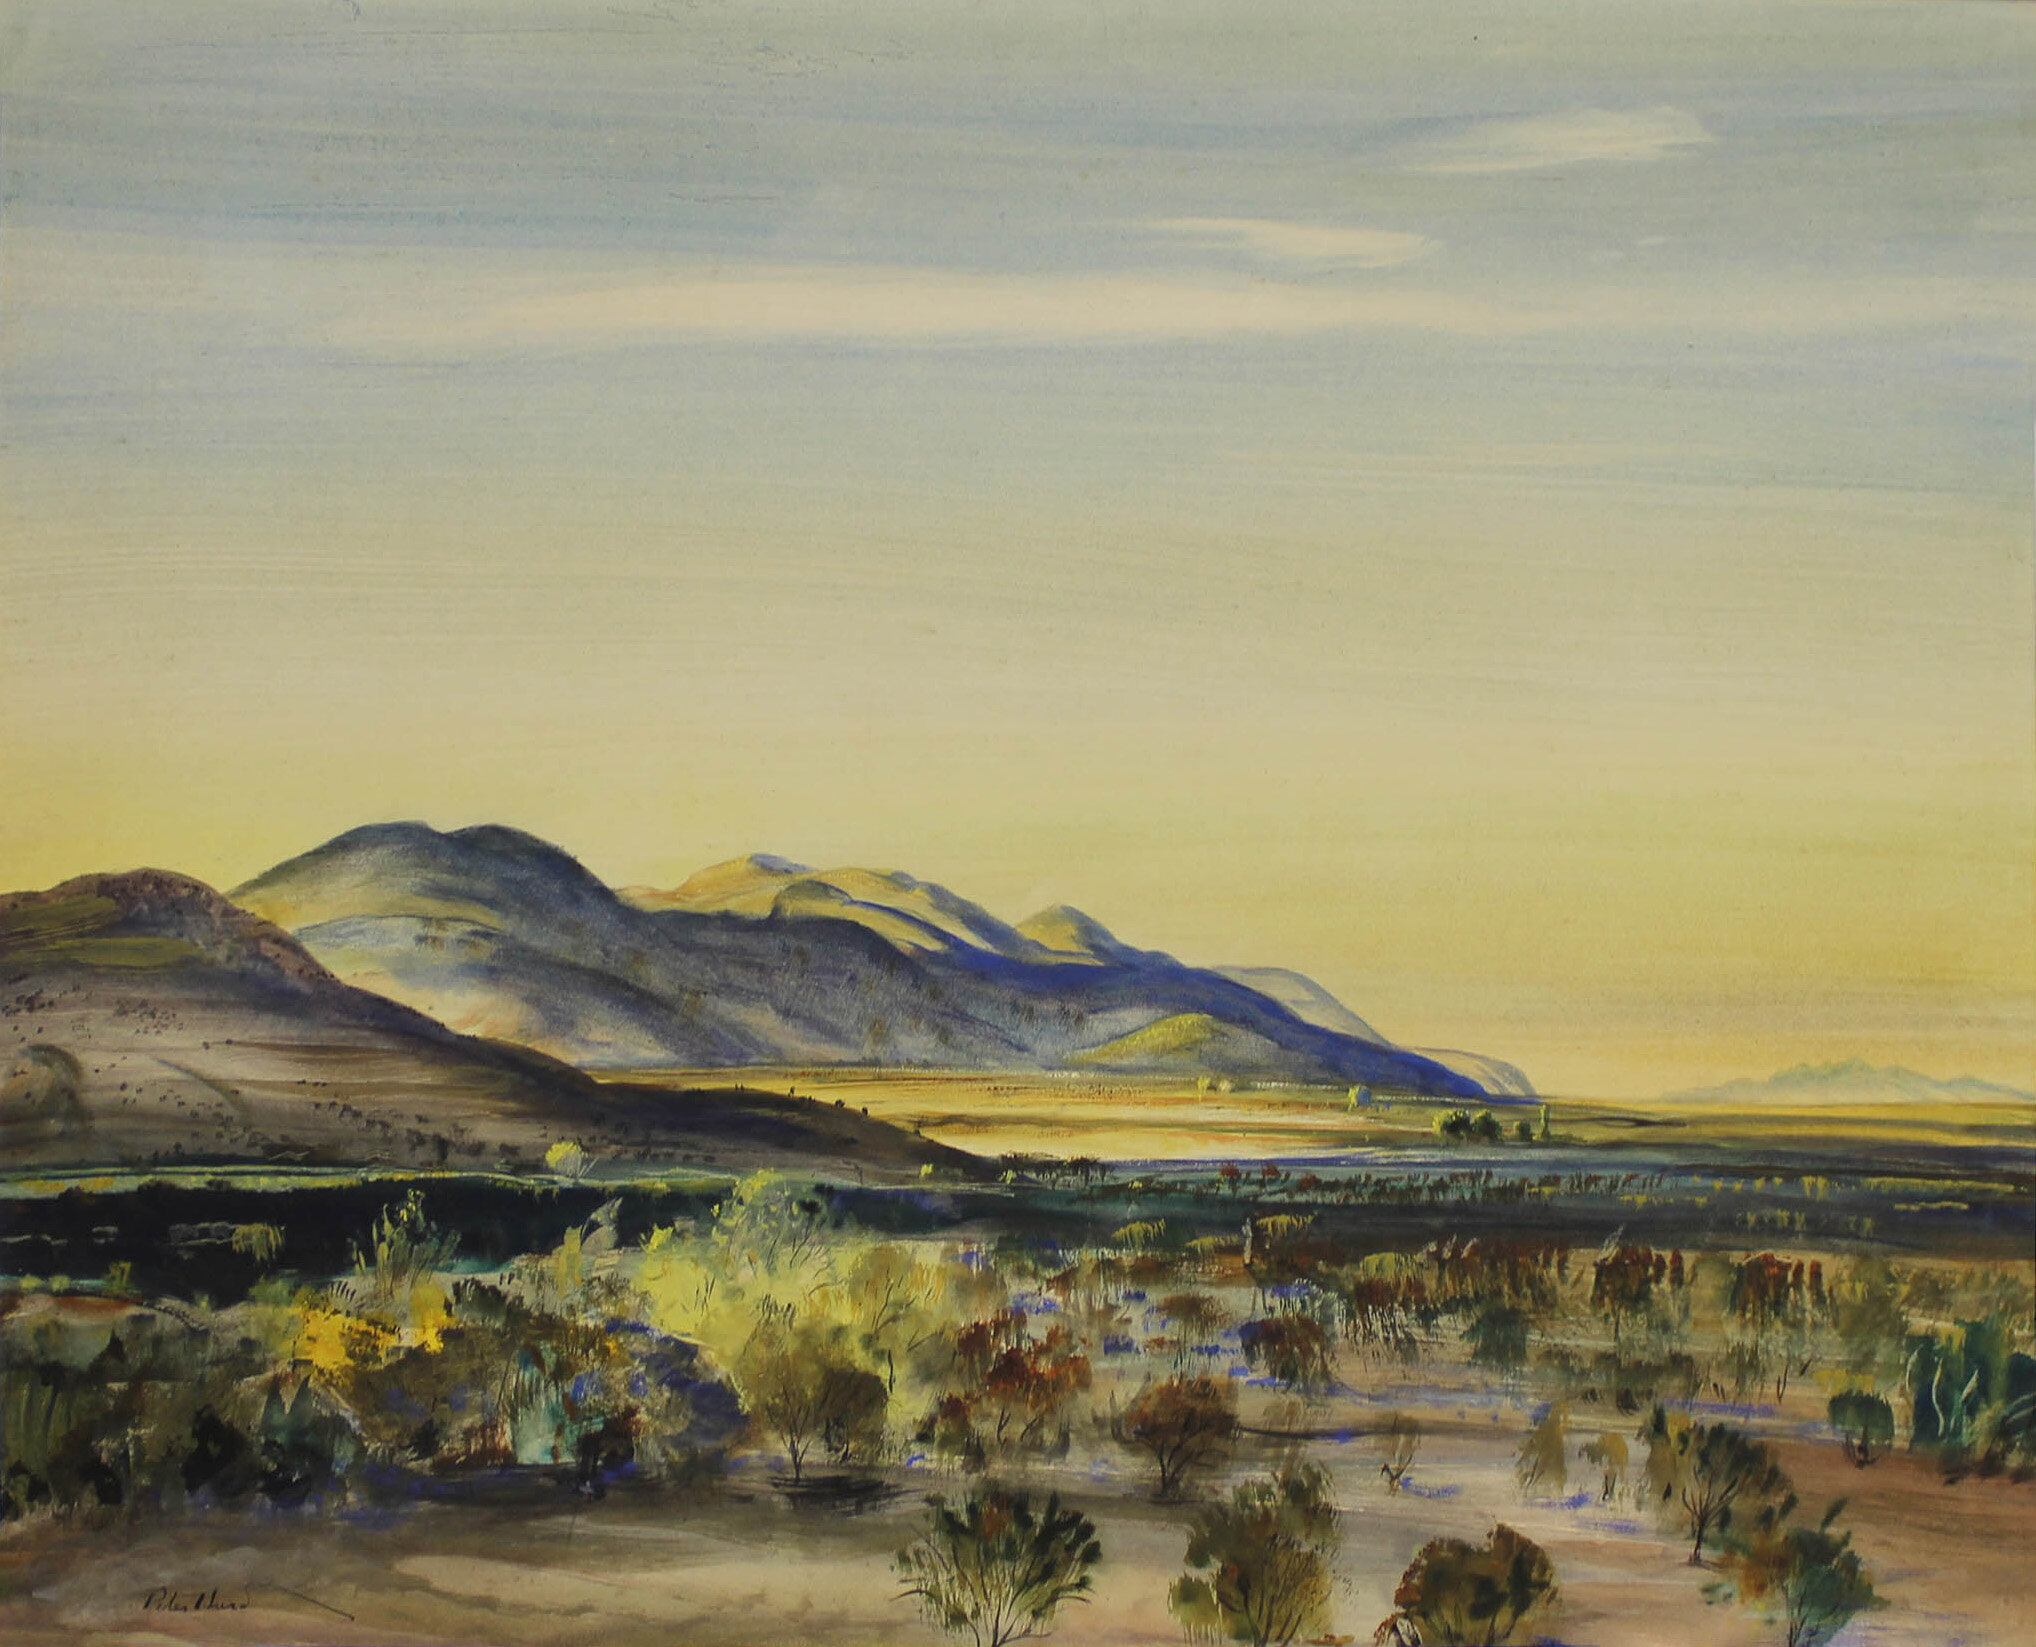 Peter Hurd, La Luz Sunrise, n.d., watercolor on paper Collection of The Grace Museum, Gift of Christopher S. Hawkins and J. Marc Hawkins in loving memory of Sam and Susan Reeves